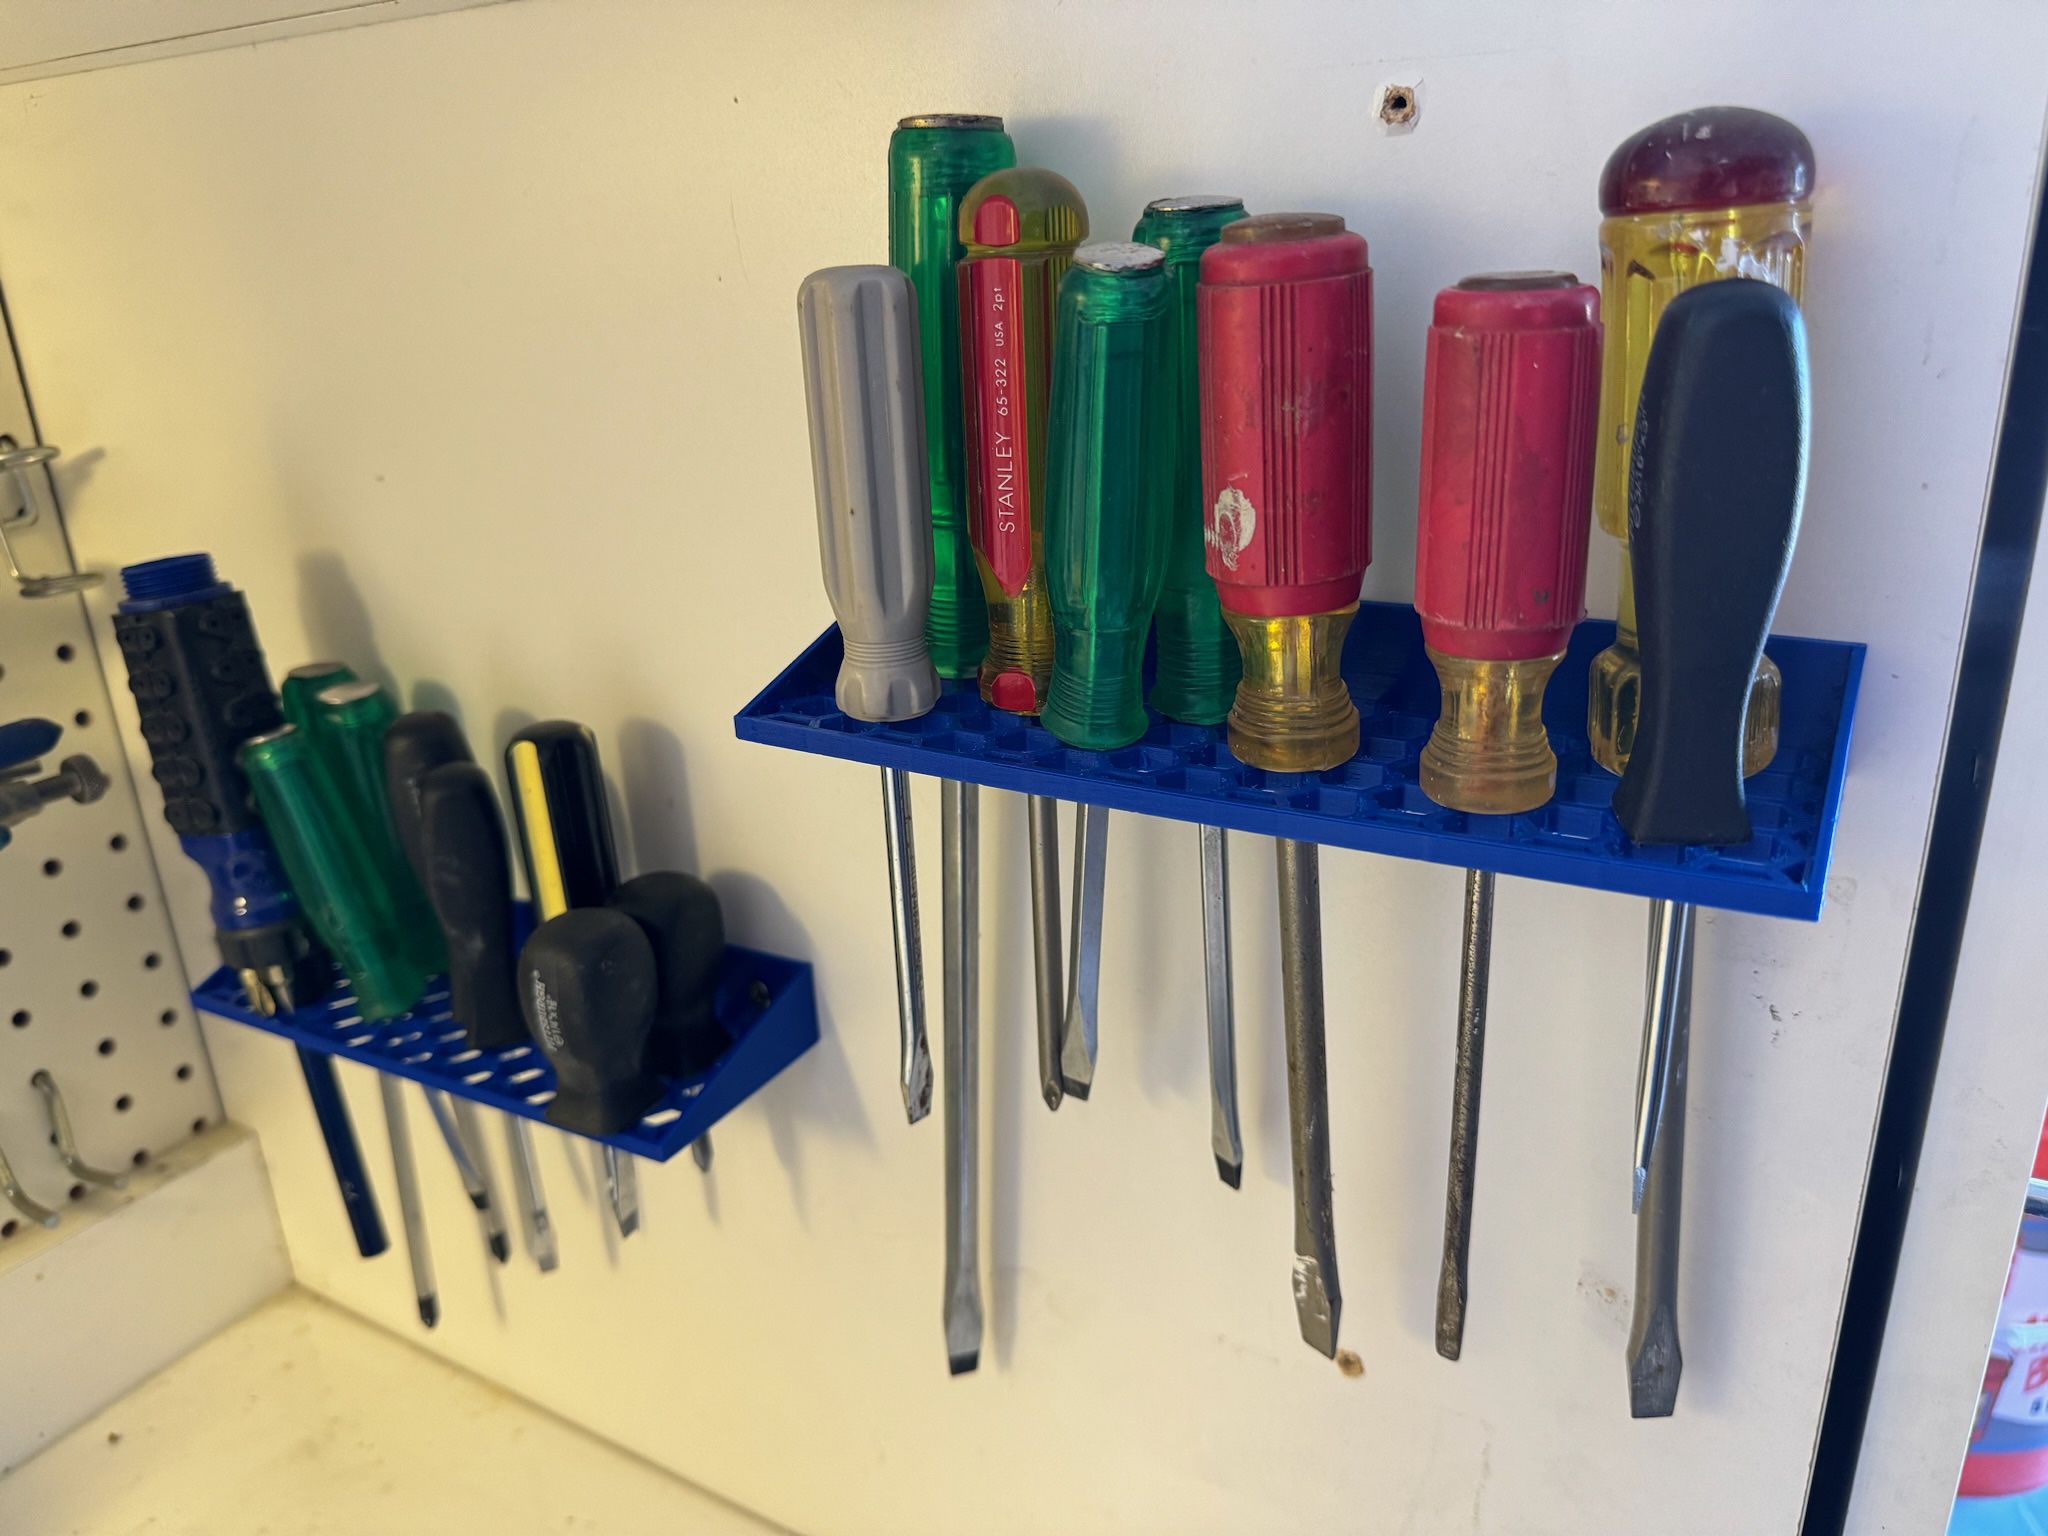 Wall Mounted Screw Driver Holders